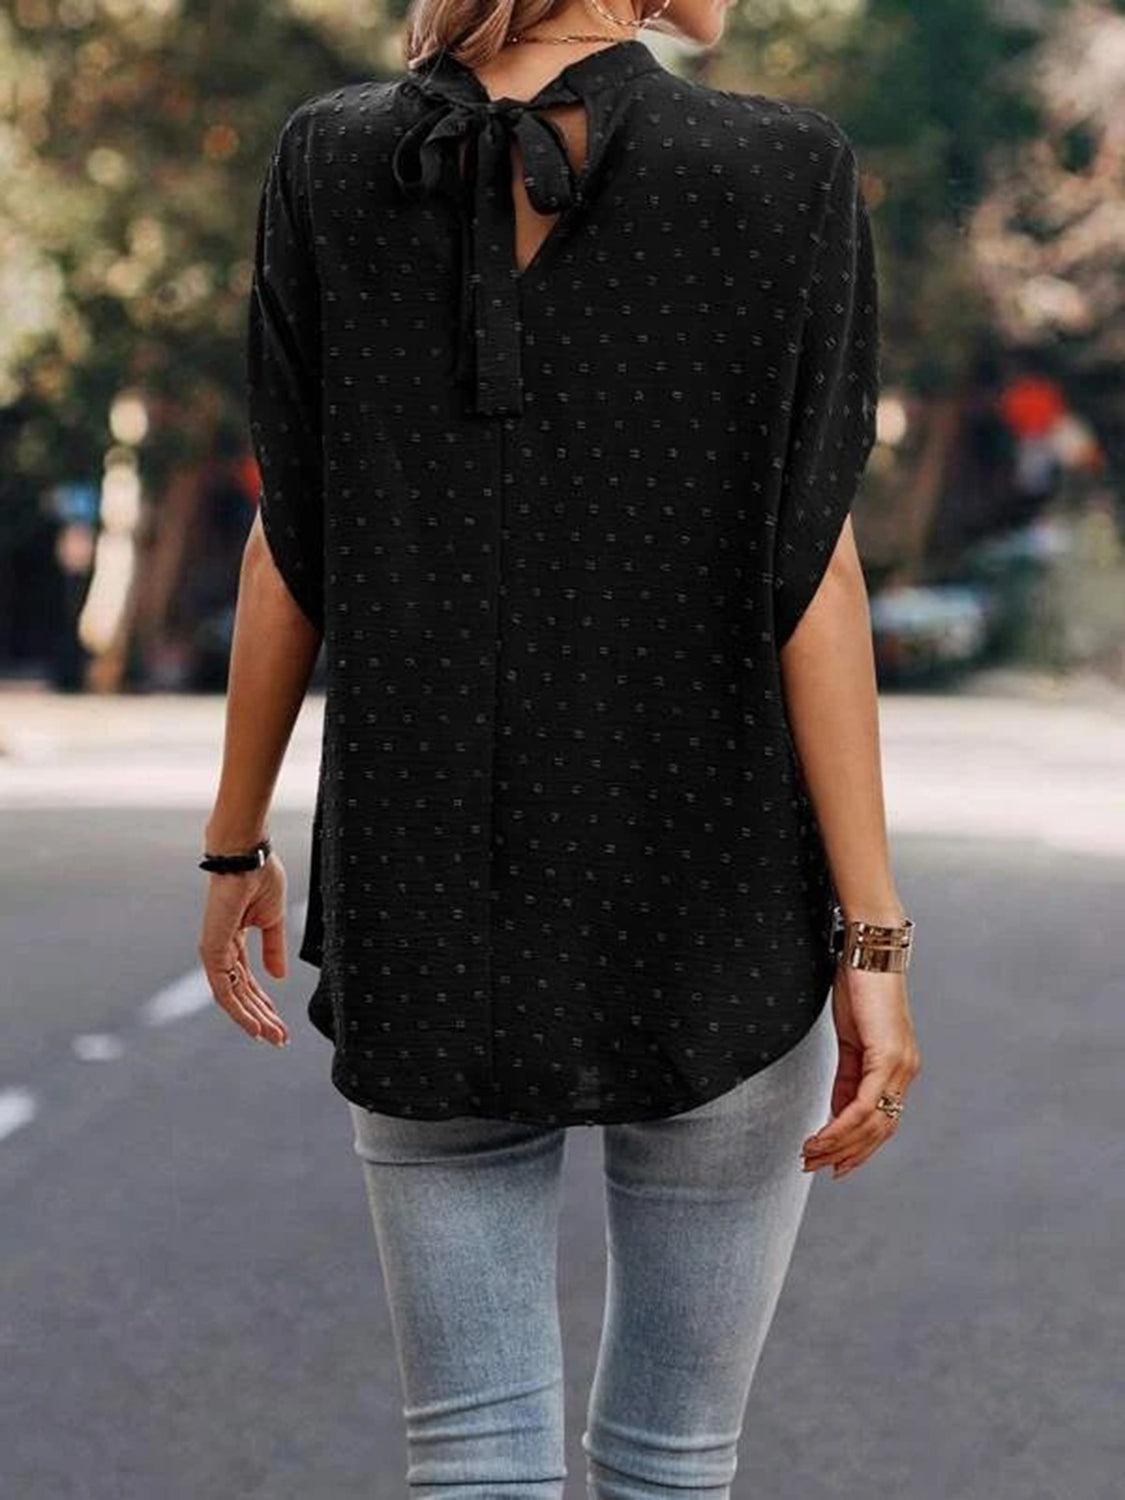 a woman walking down a street wearing a black shirt and jeans